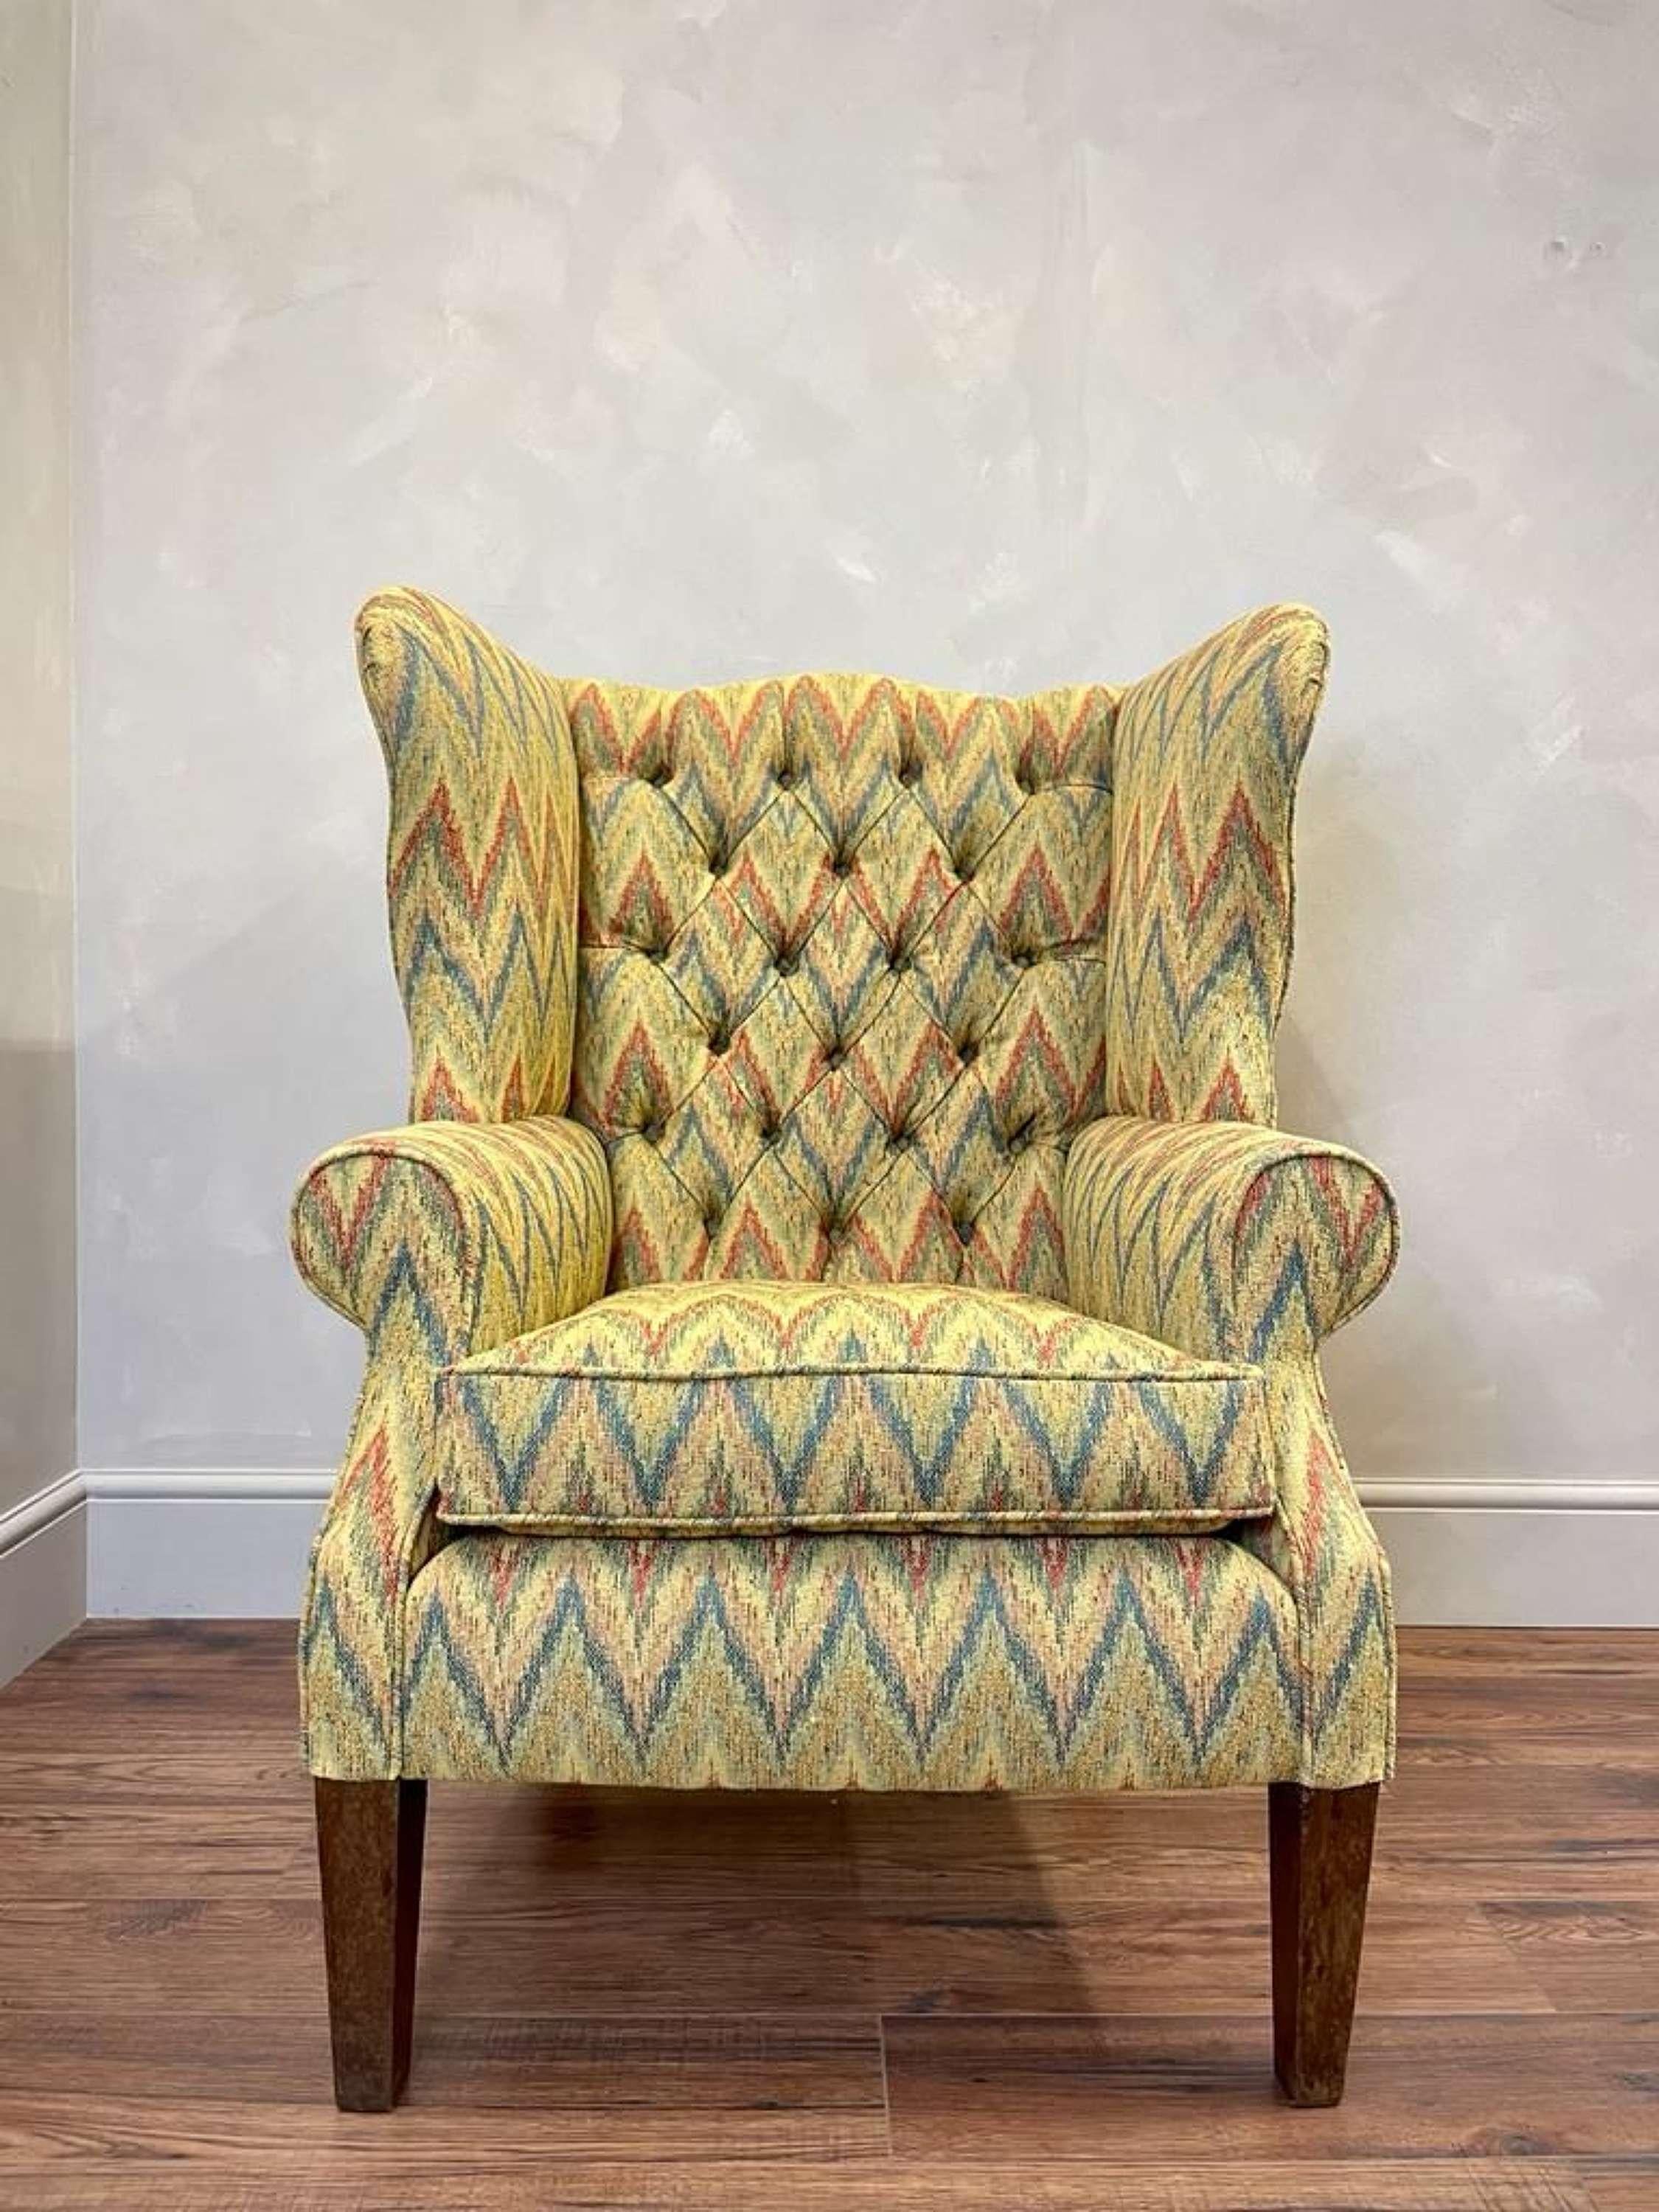 Victorian wingback armchair 
Traditionally Re upholstered in flame stitch tapestry fabric 
New Feather cushion 
.

Back height - 108 cm 
Wing Width - 81 cm 
Depth - 77 cm
Seat height - 53 cm 
Front width - 70 cm

We are happy to work with